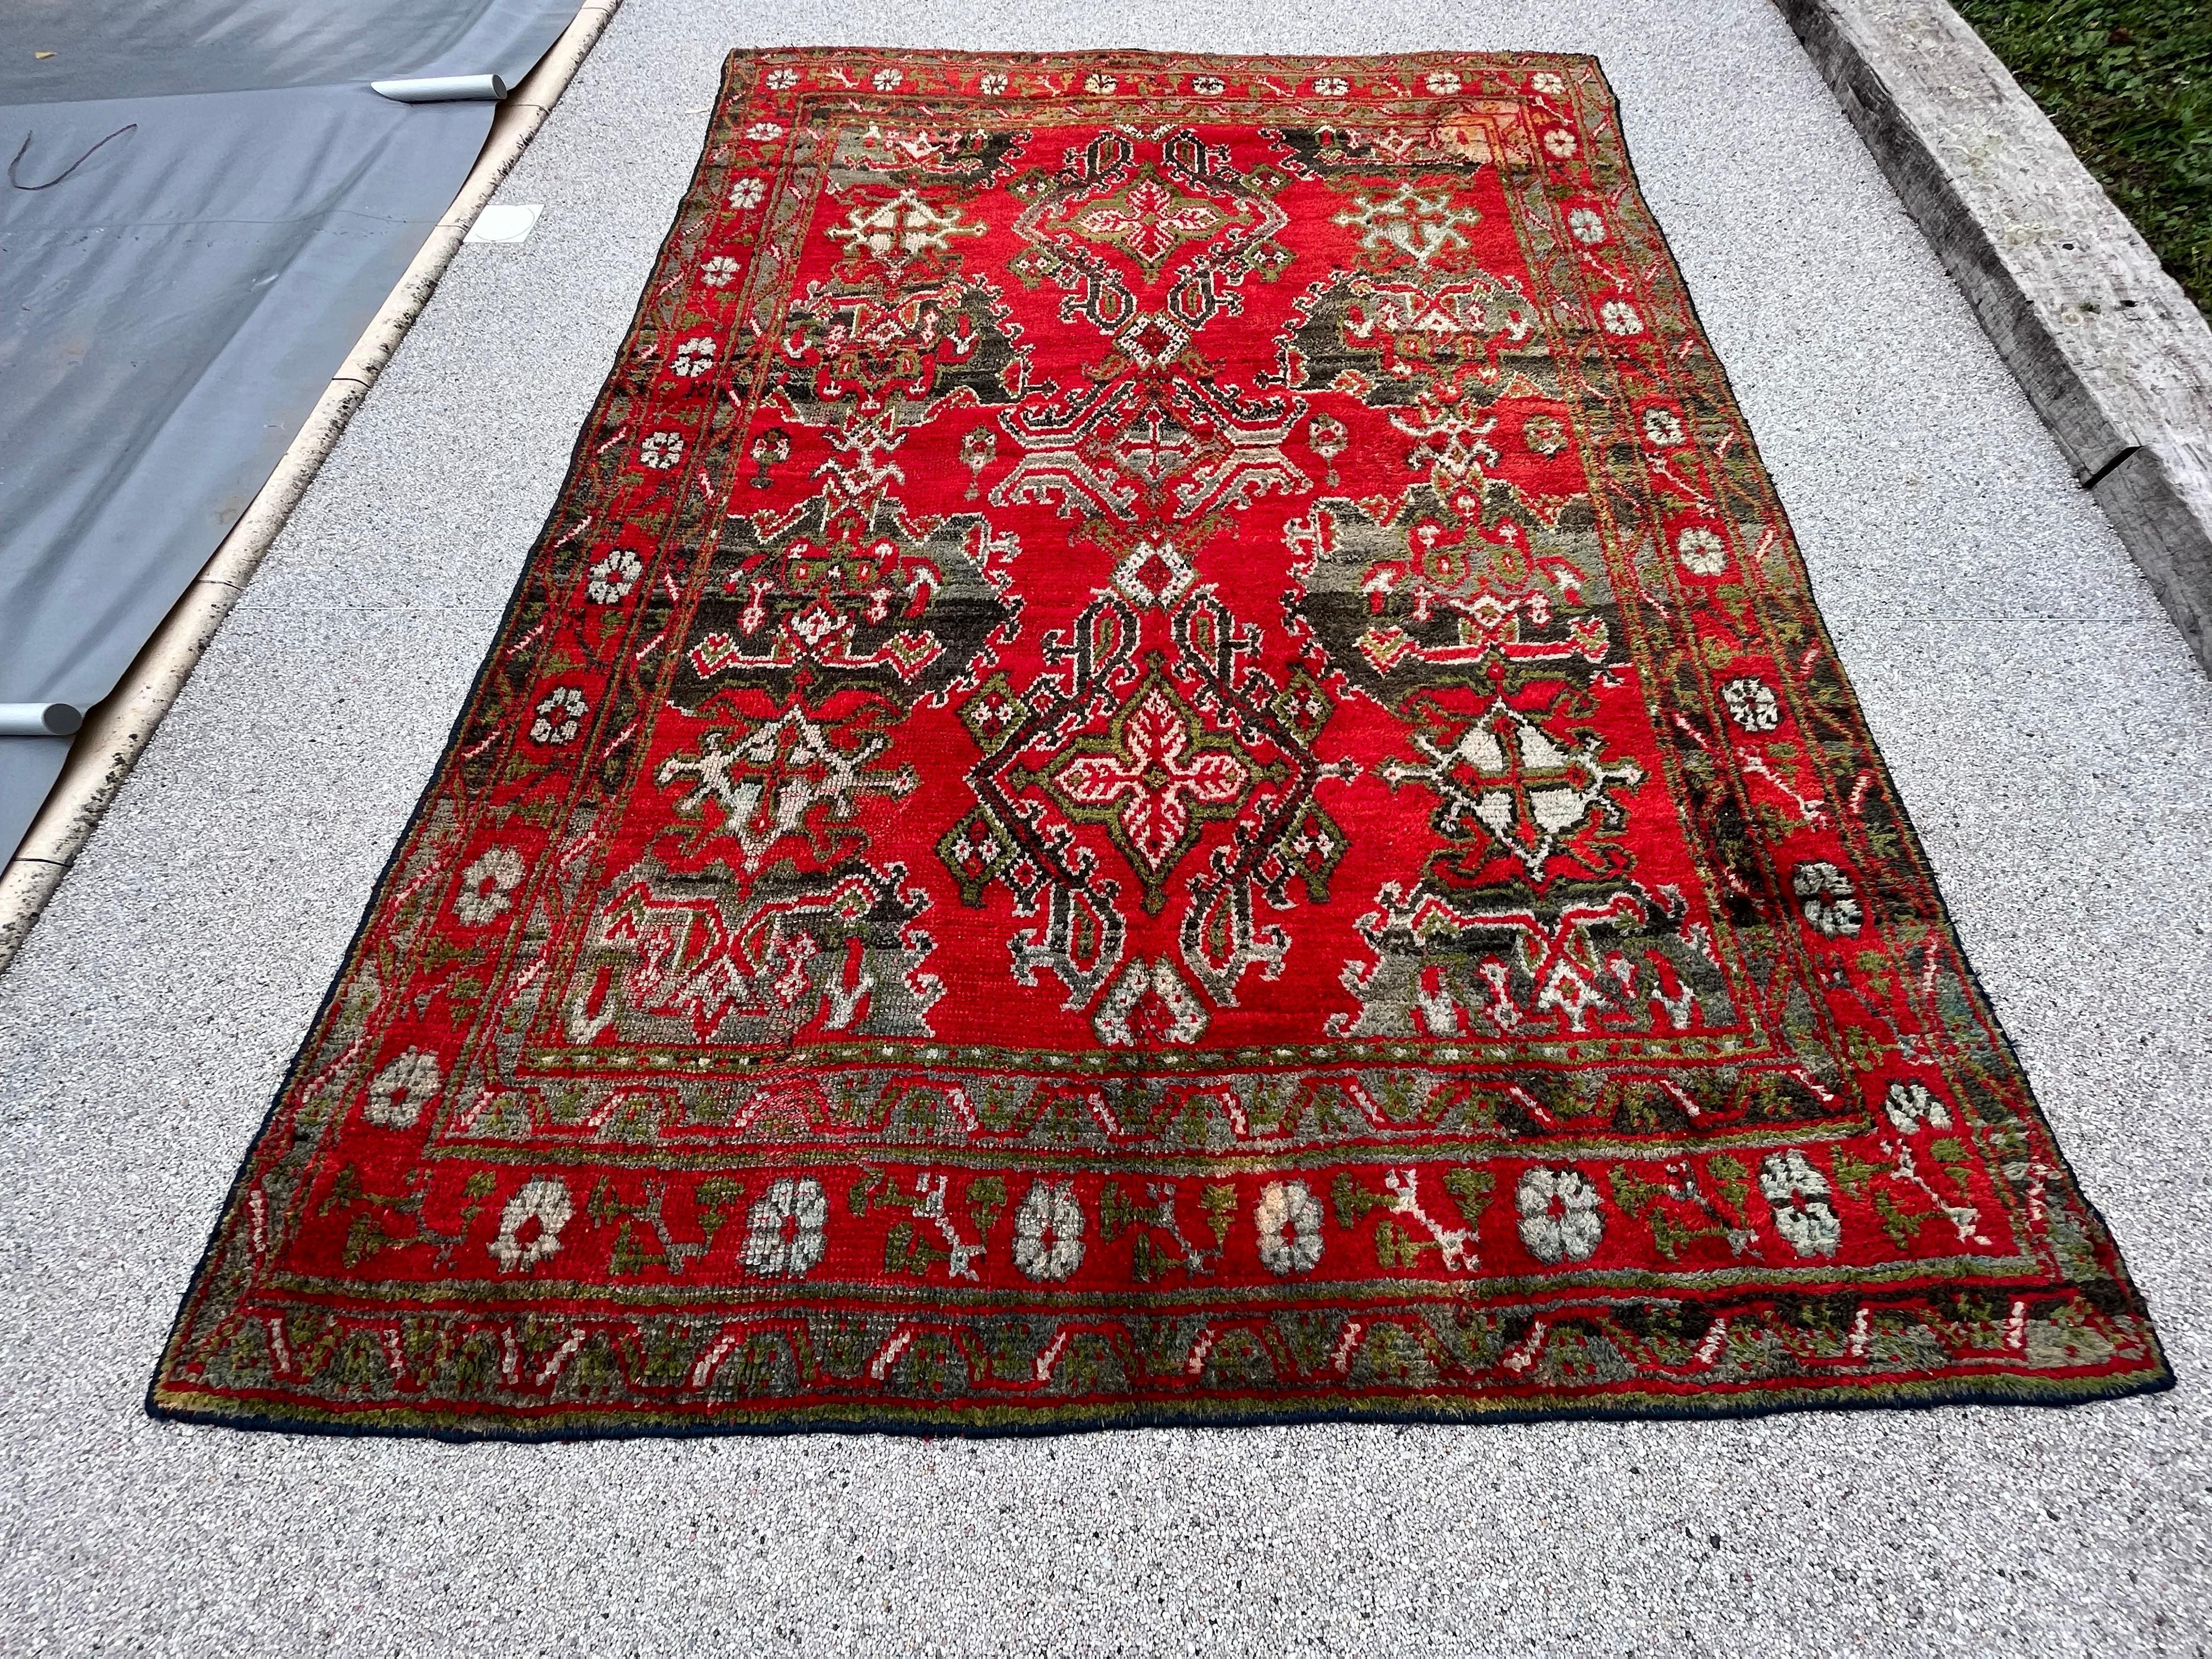 Turkish Ouchak rug early 20th century.

Ouchak rug, Circa 1900 with red background. Decor of staggered geometric medallions. Like Ouchak rugs, Smyrna rugs remain the most prized and sought after Turkish rugs by collectors and dealers.

The carpet